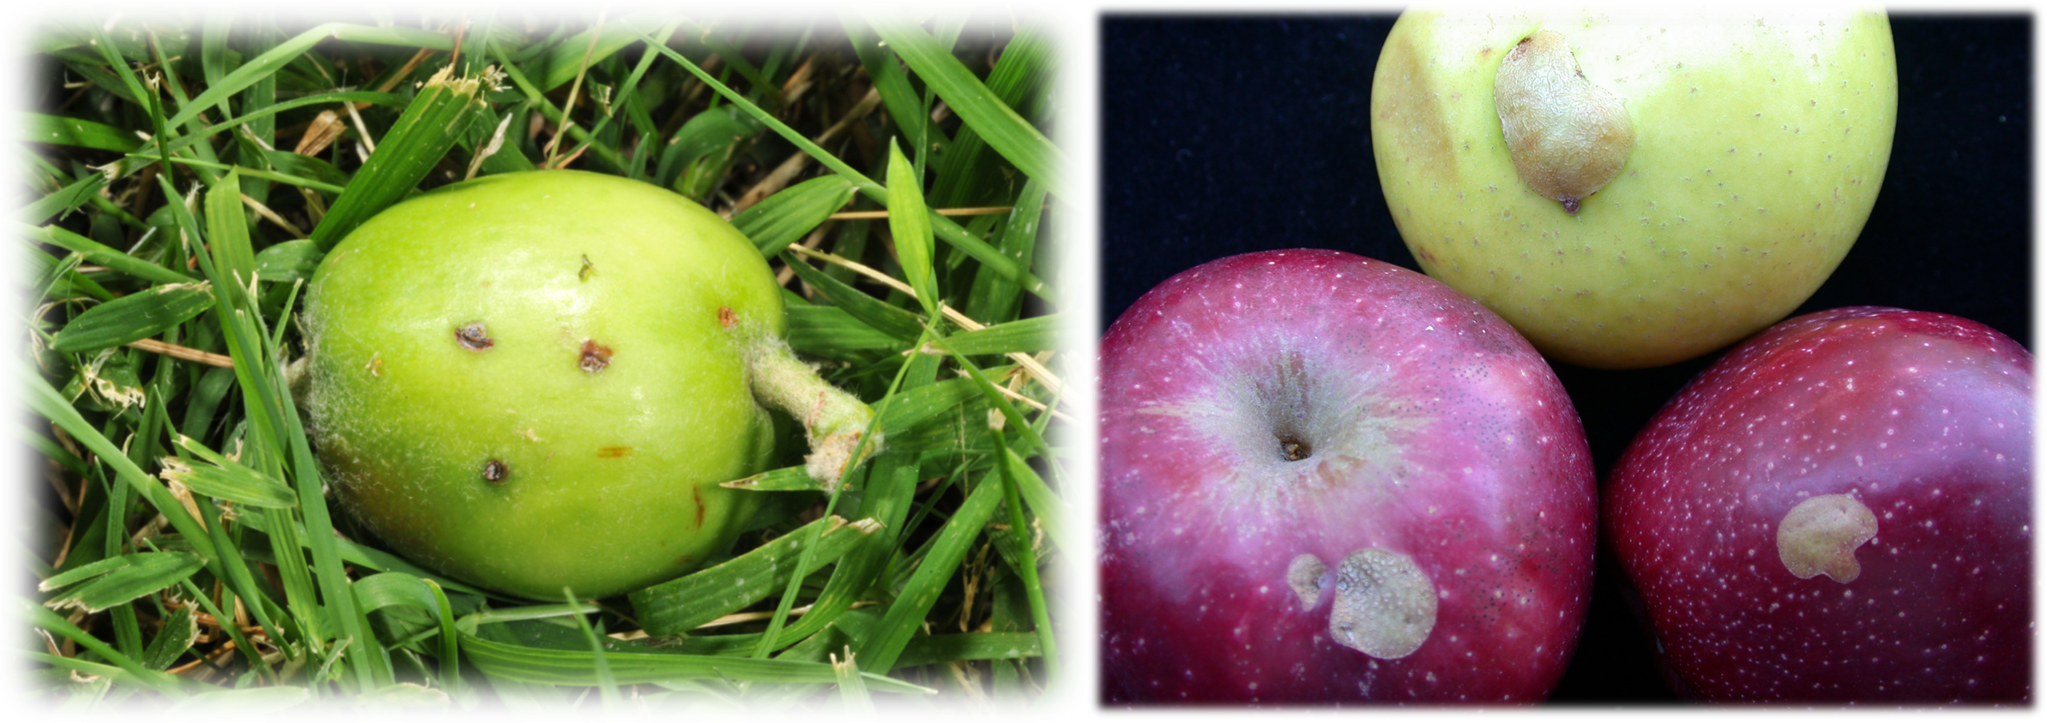 Tips for managing plum curculio in tree fruit Purdue University Facts for Fancy Fruit pic pic